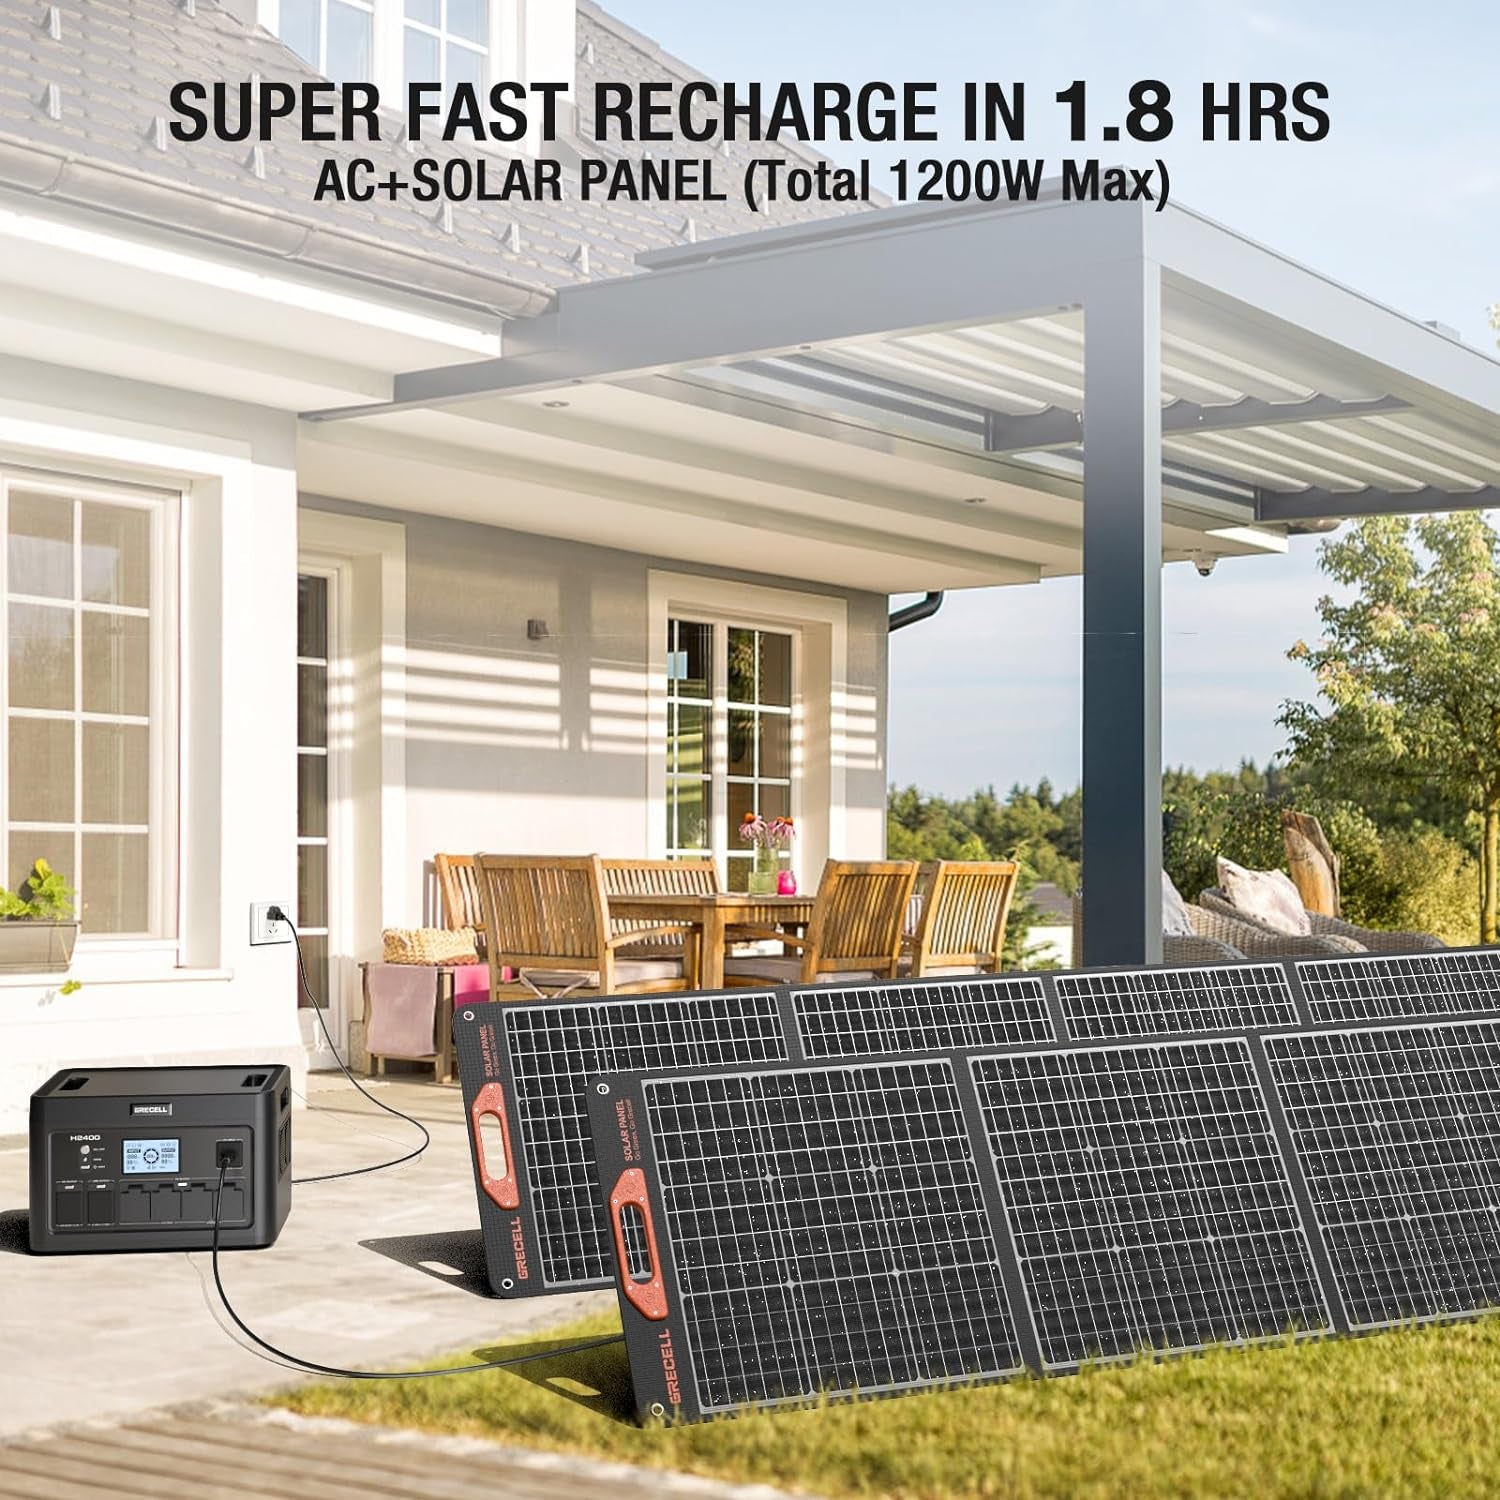 Solar Generator 2400W Portable Power Station, 1843Wh UPS Backup Lifepo4 Battery Power Supply with 11 Outlets(4 2000W AC Outlets,2 PD100W), 2Hrs Quick Charge for Home Emergency Camping RV Trip Van